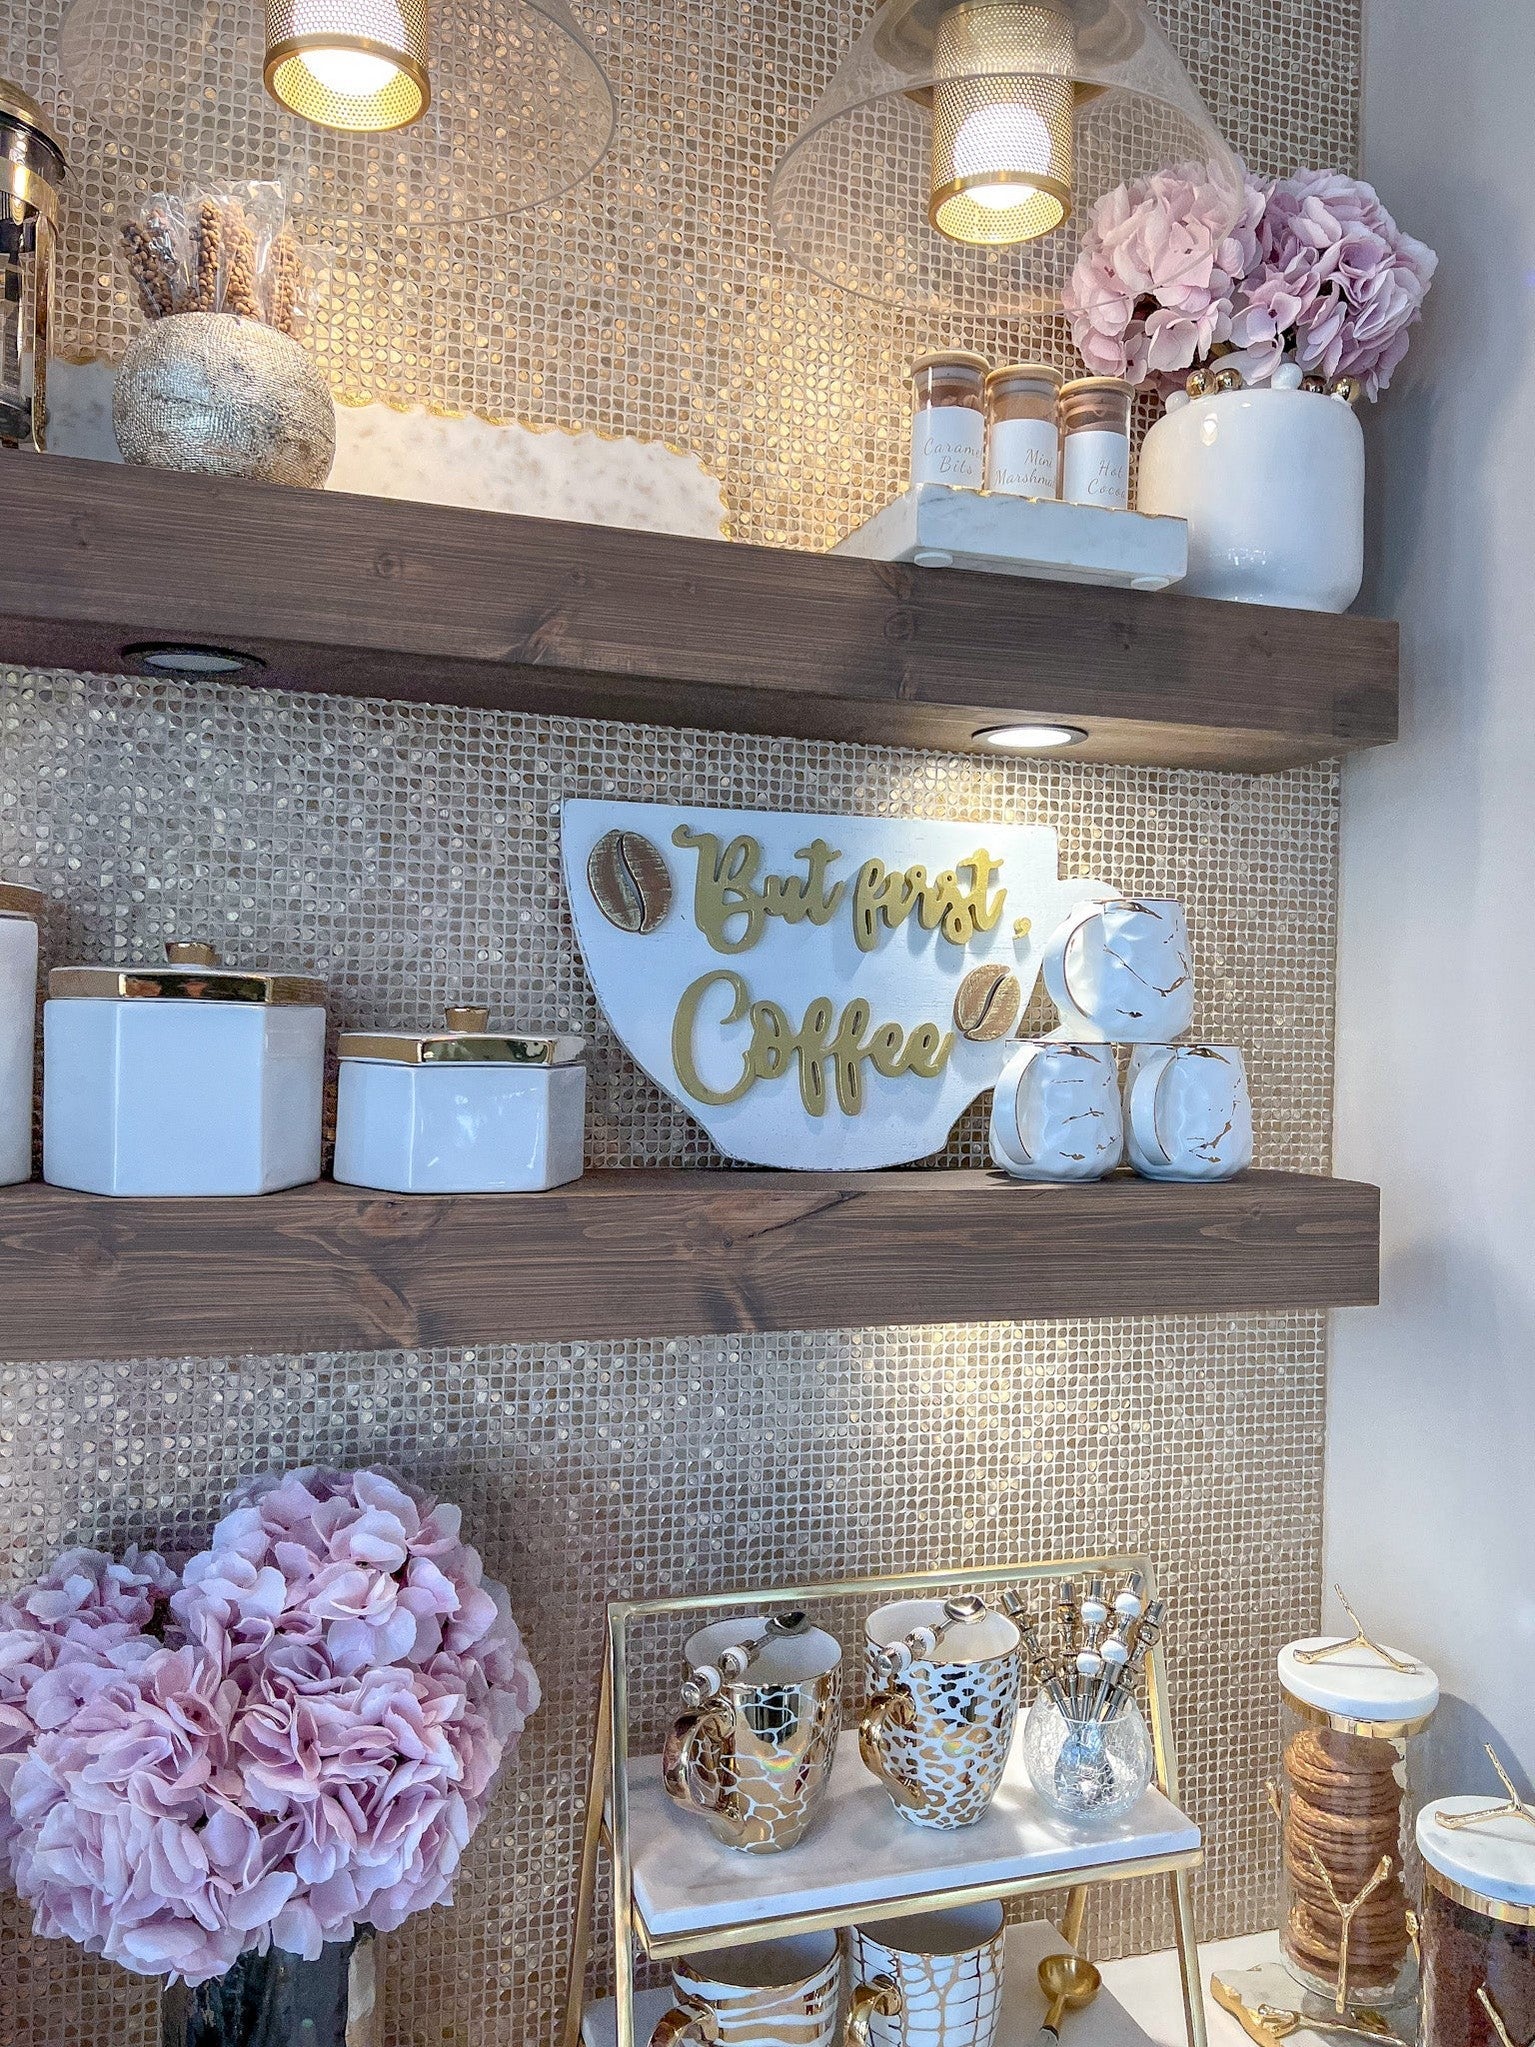 Here Now! Your Dream Coffee Bar☕ - Inspire Me Home Decor